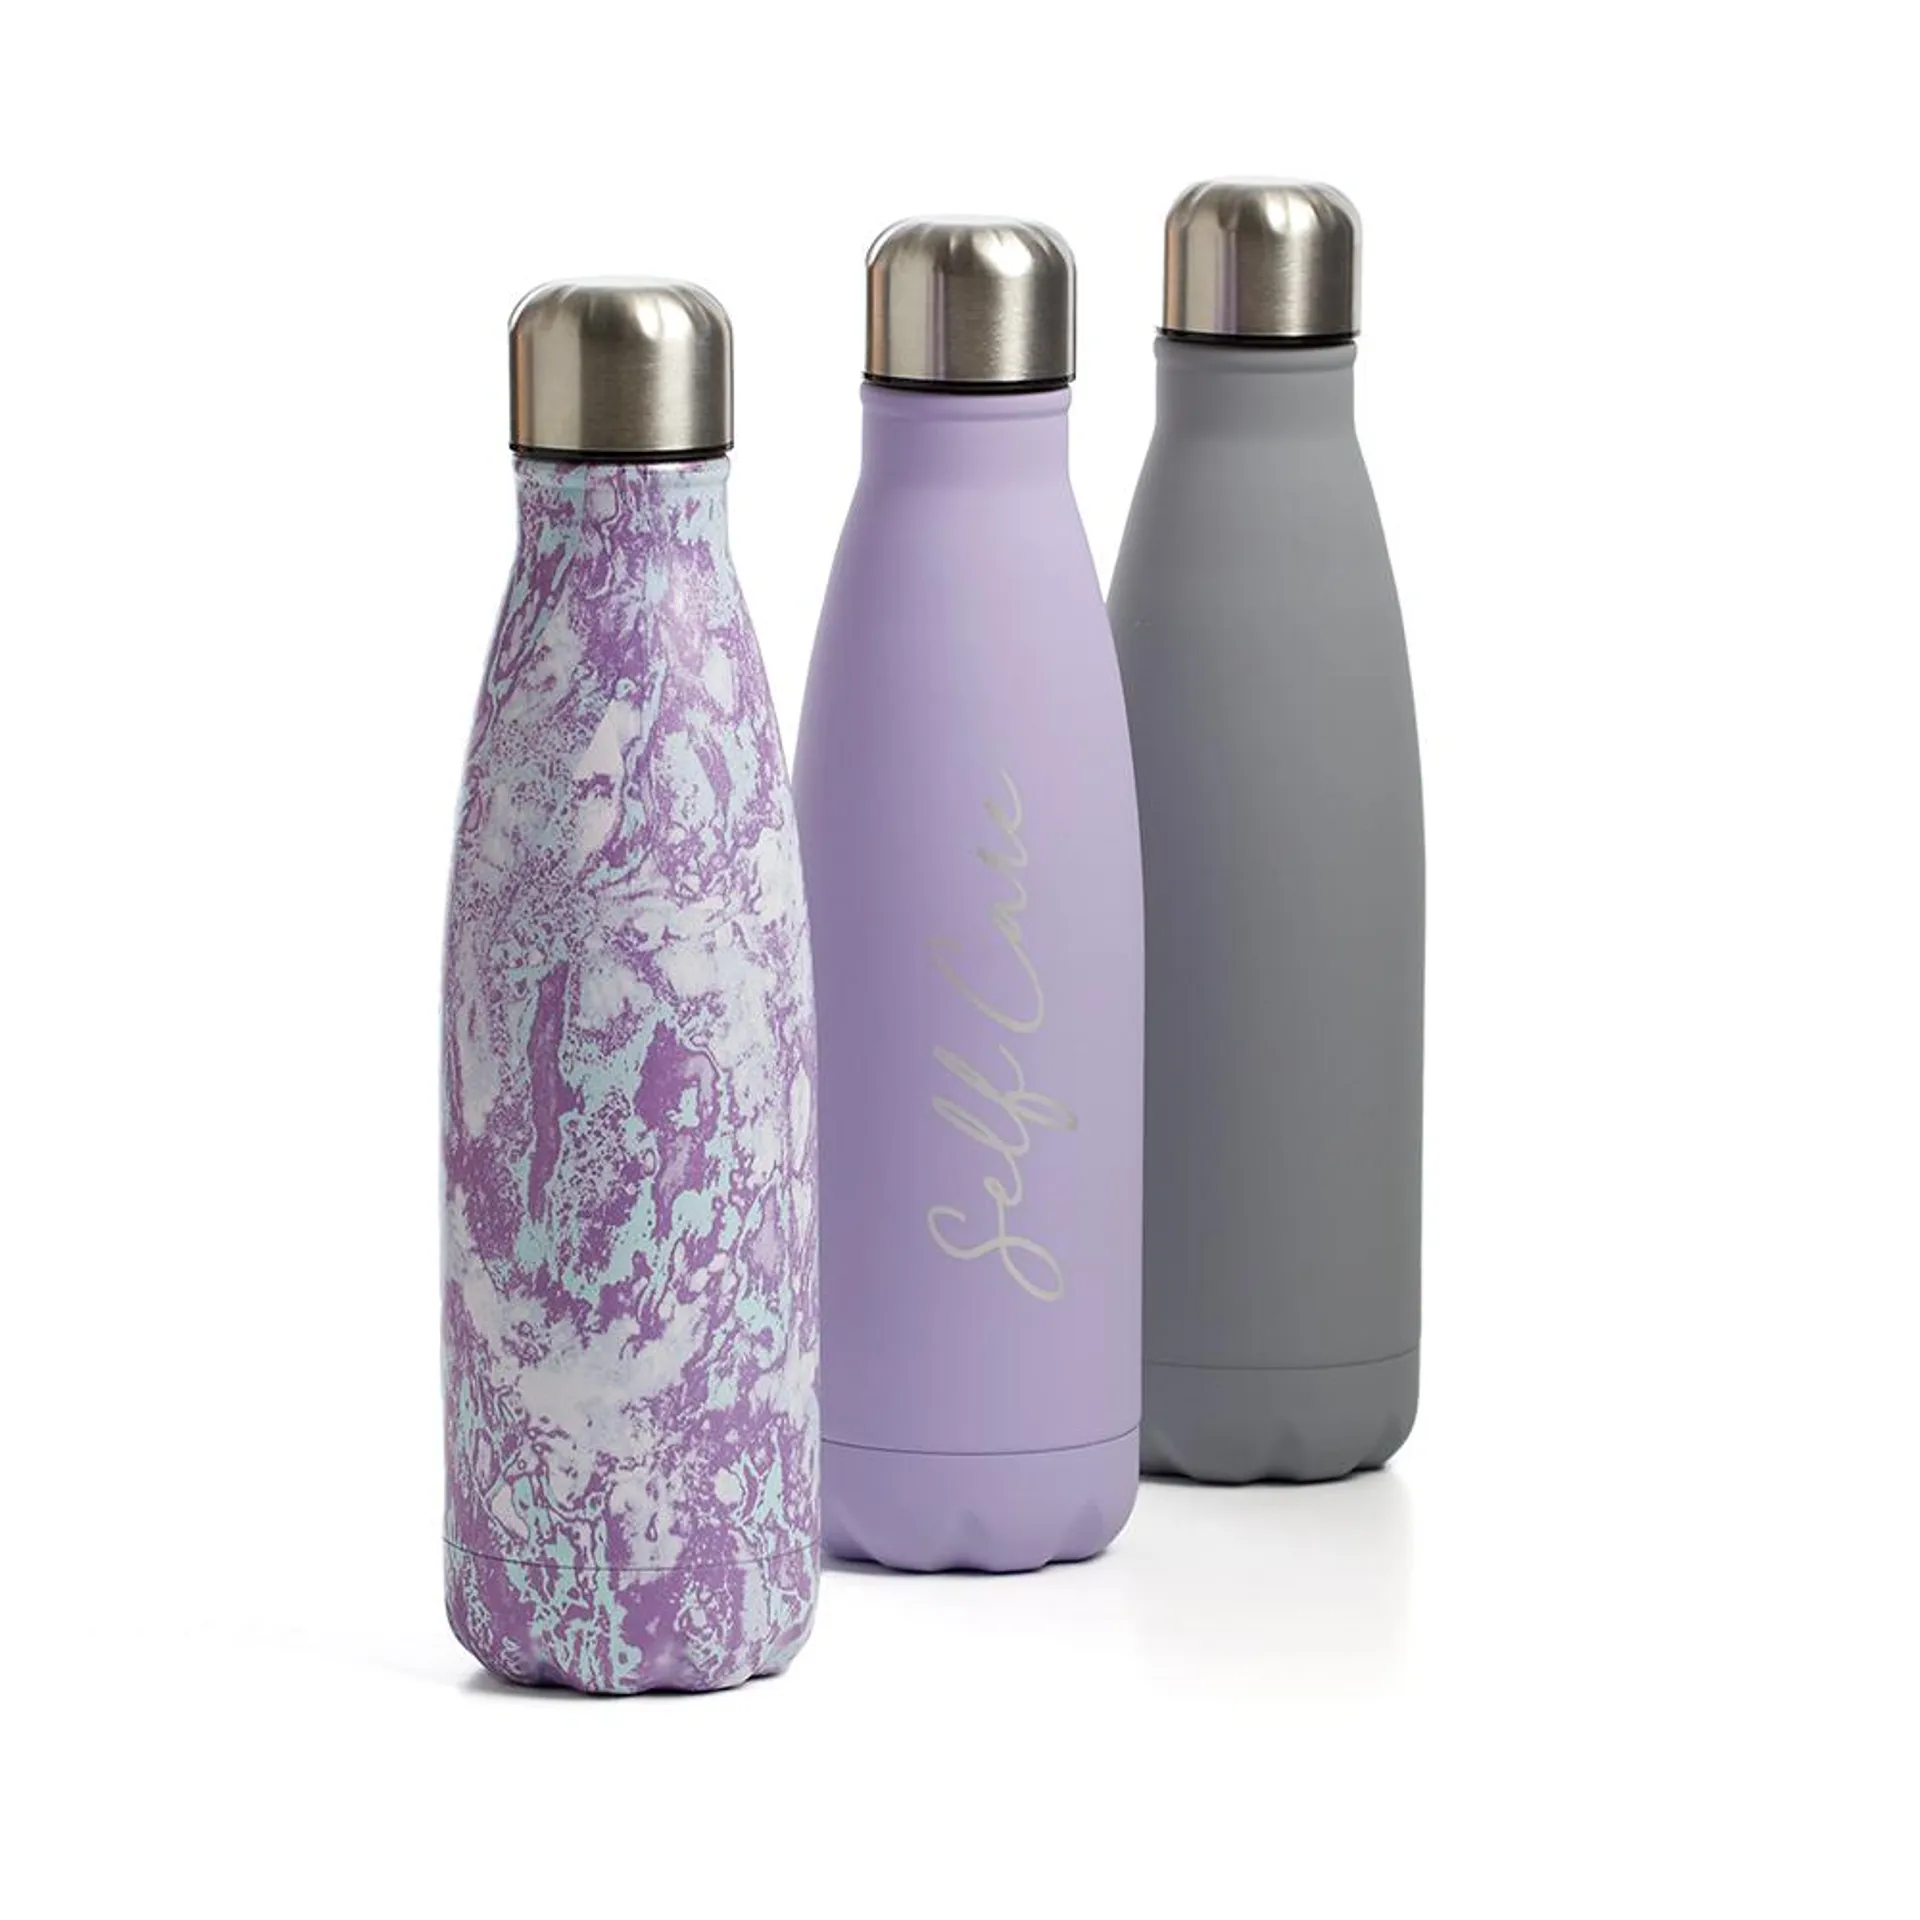 X-Tone: Stainless Steel Bottle